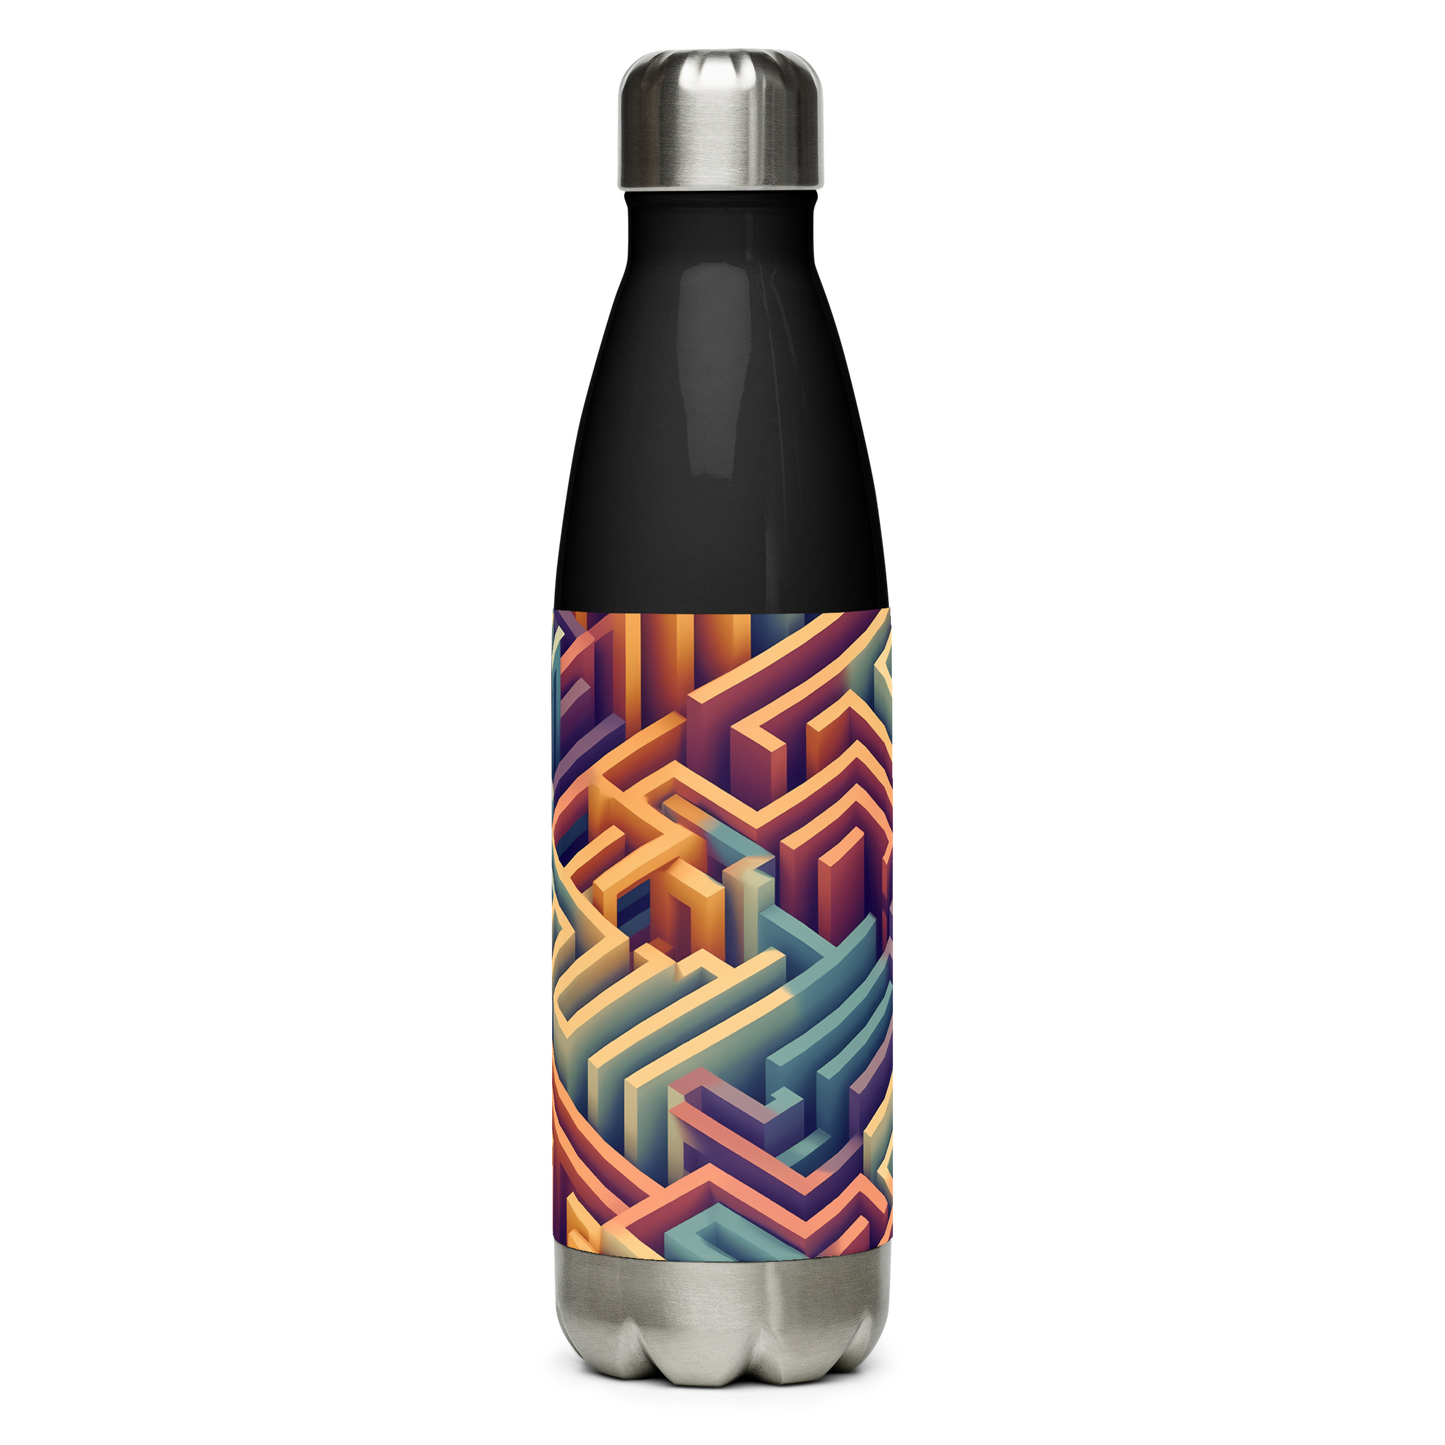 3D Maze Illusion | 3D Patterns | Stainless Steel Water Bottle - #3